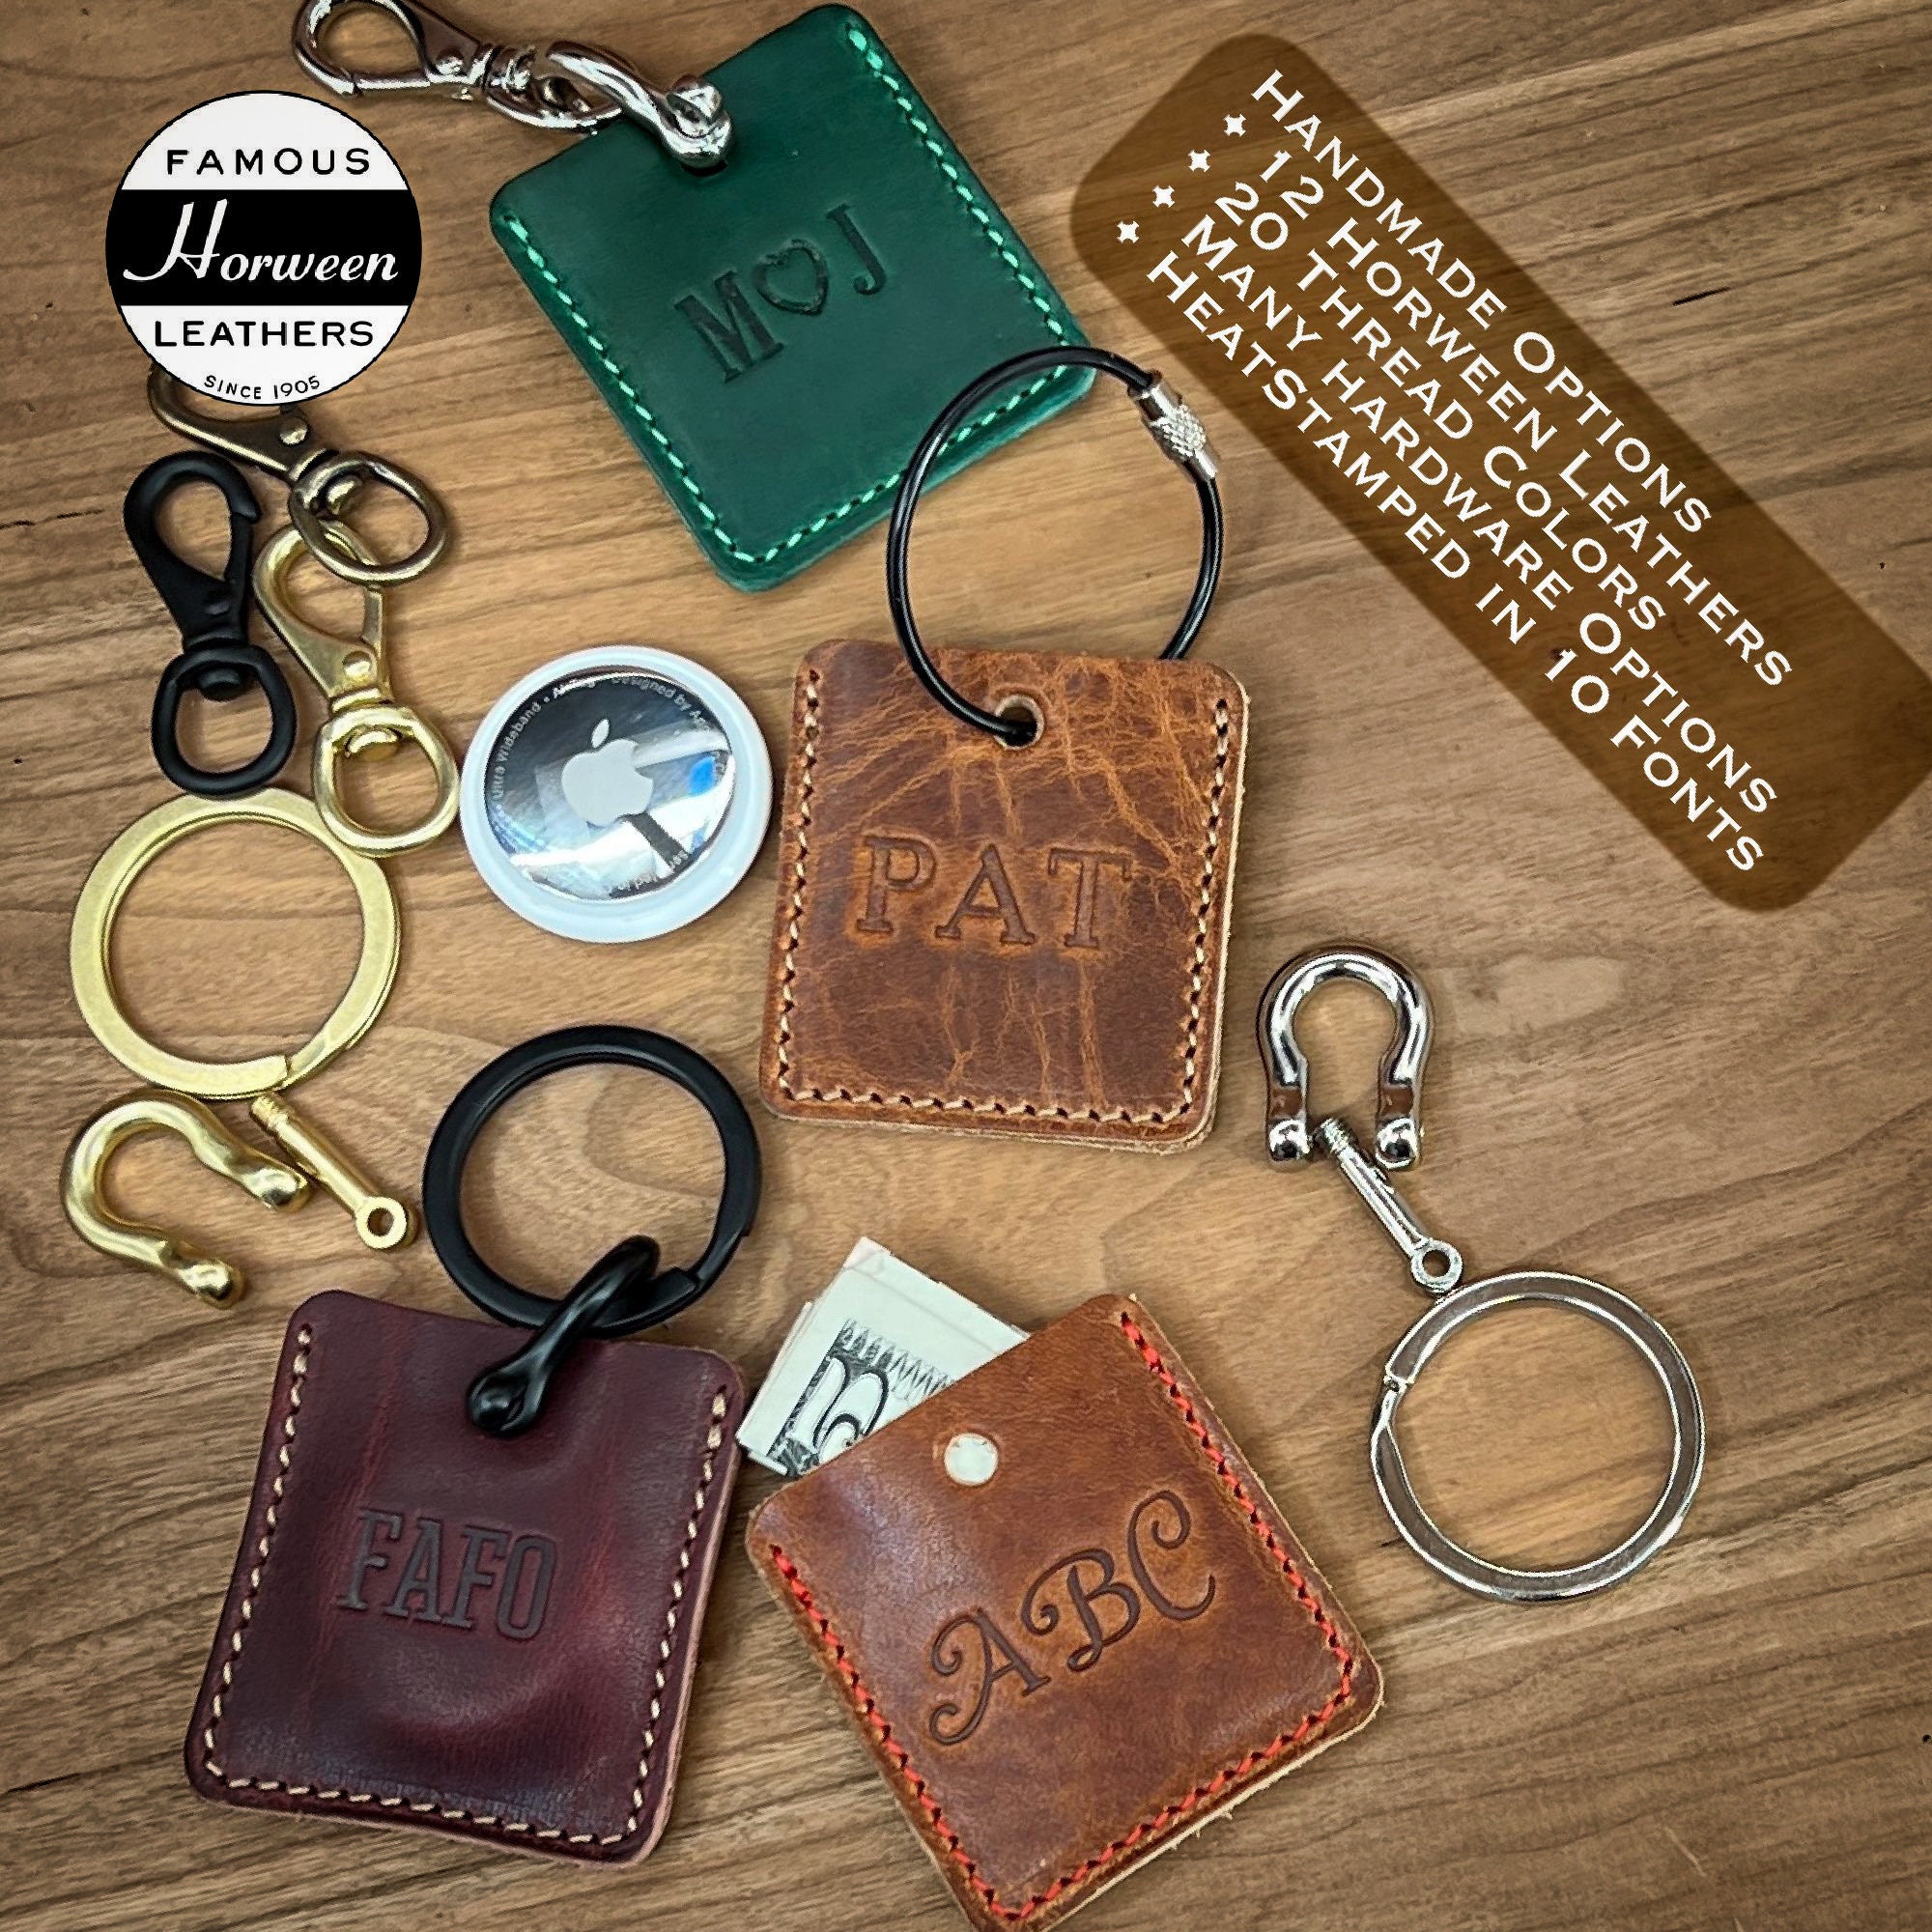 Customizable AirTag Keychain in Horween Leather. Handmade AirTag